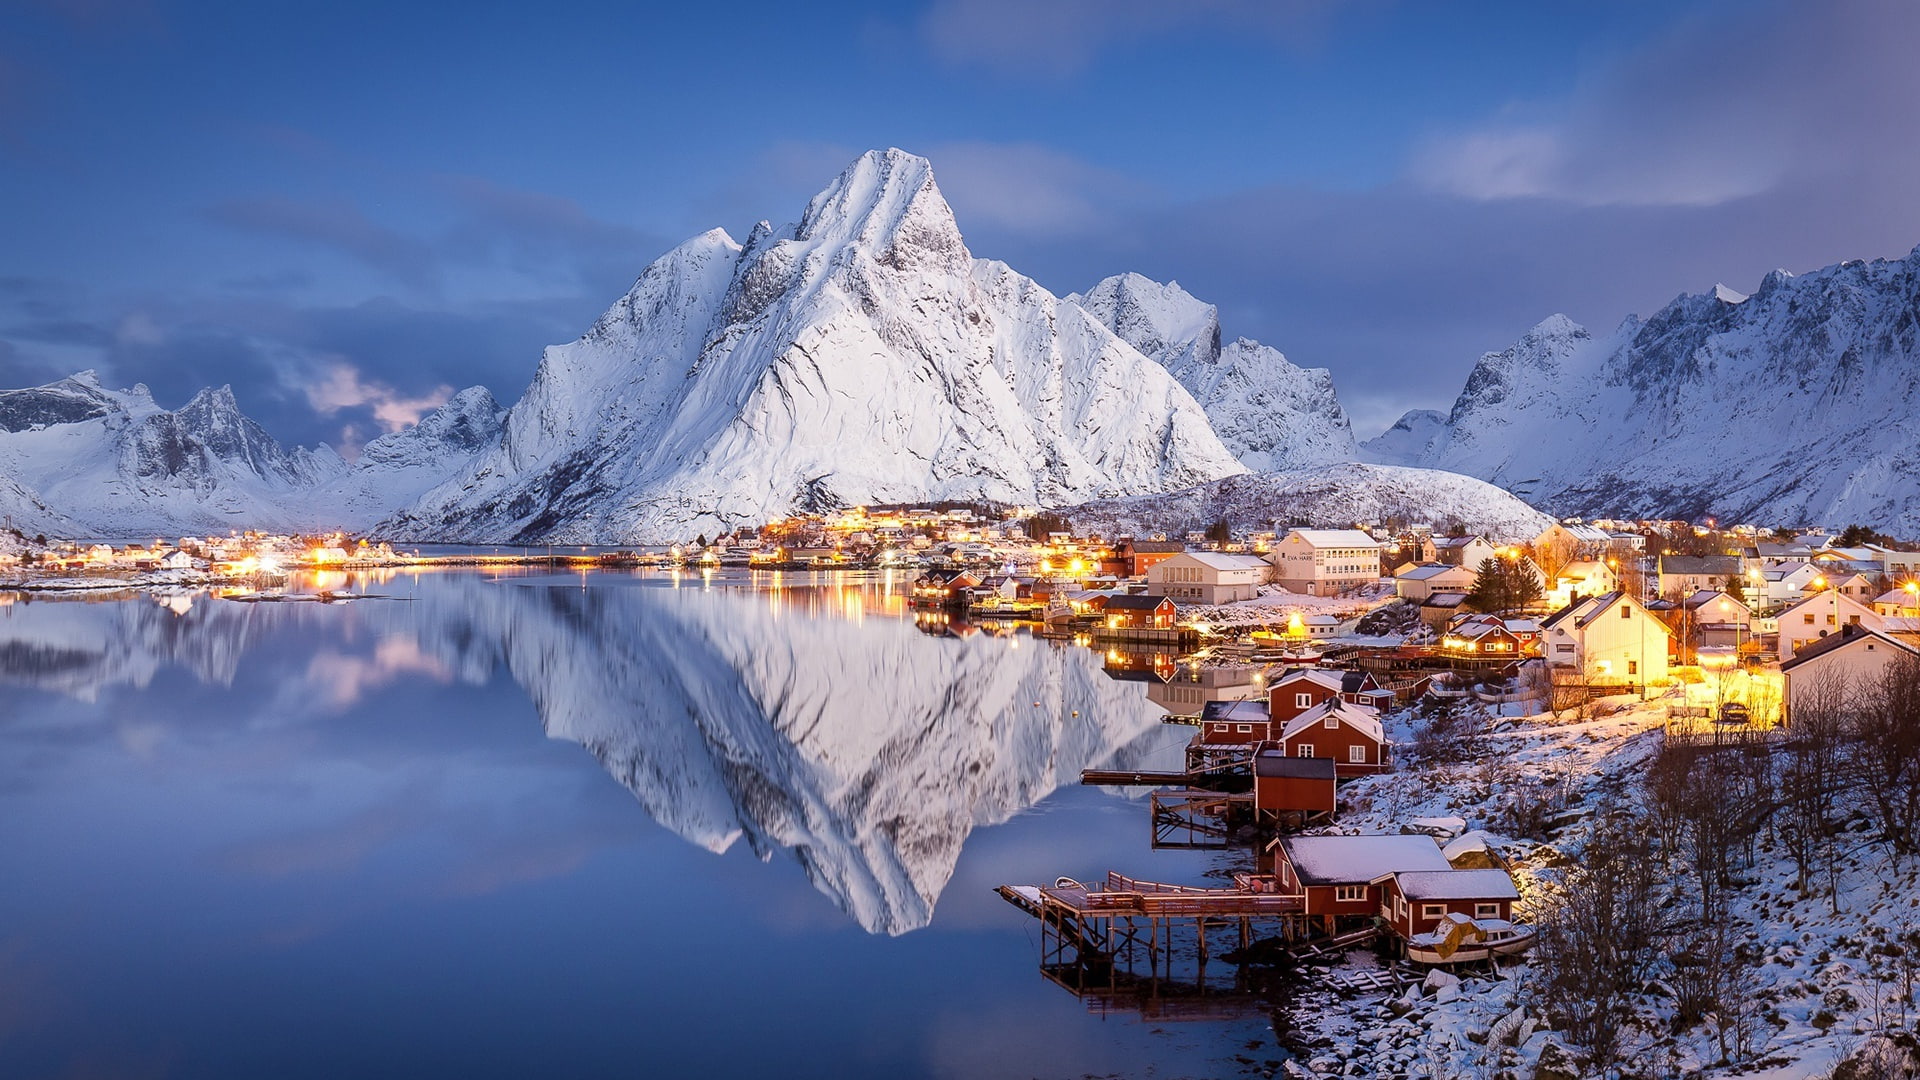 assorted-color houses, winter, snow, mountains, lake, home, the evening